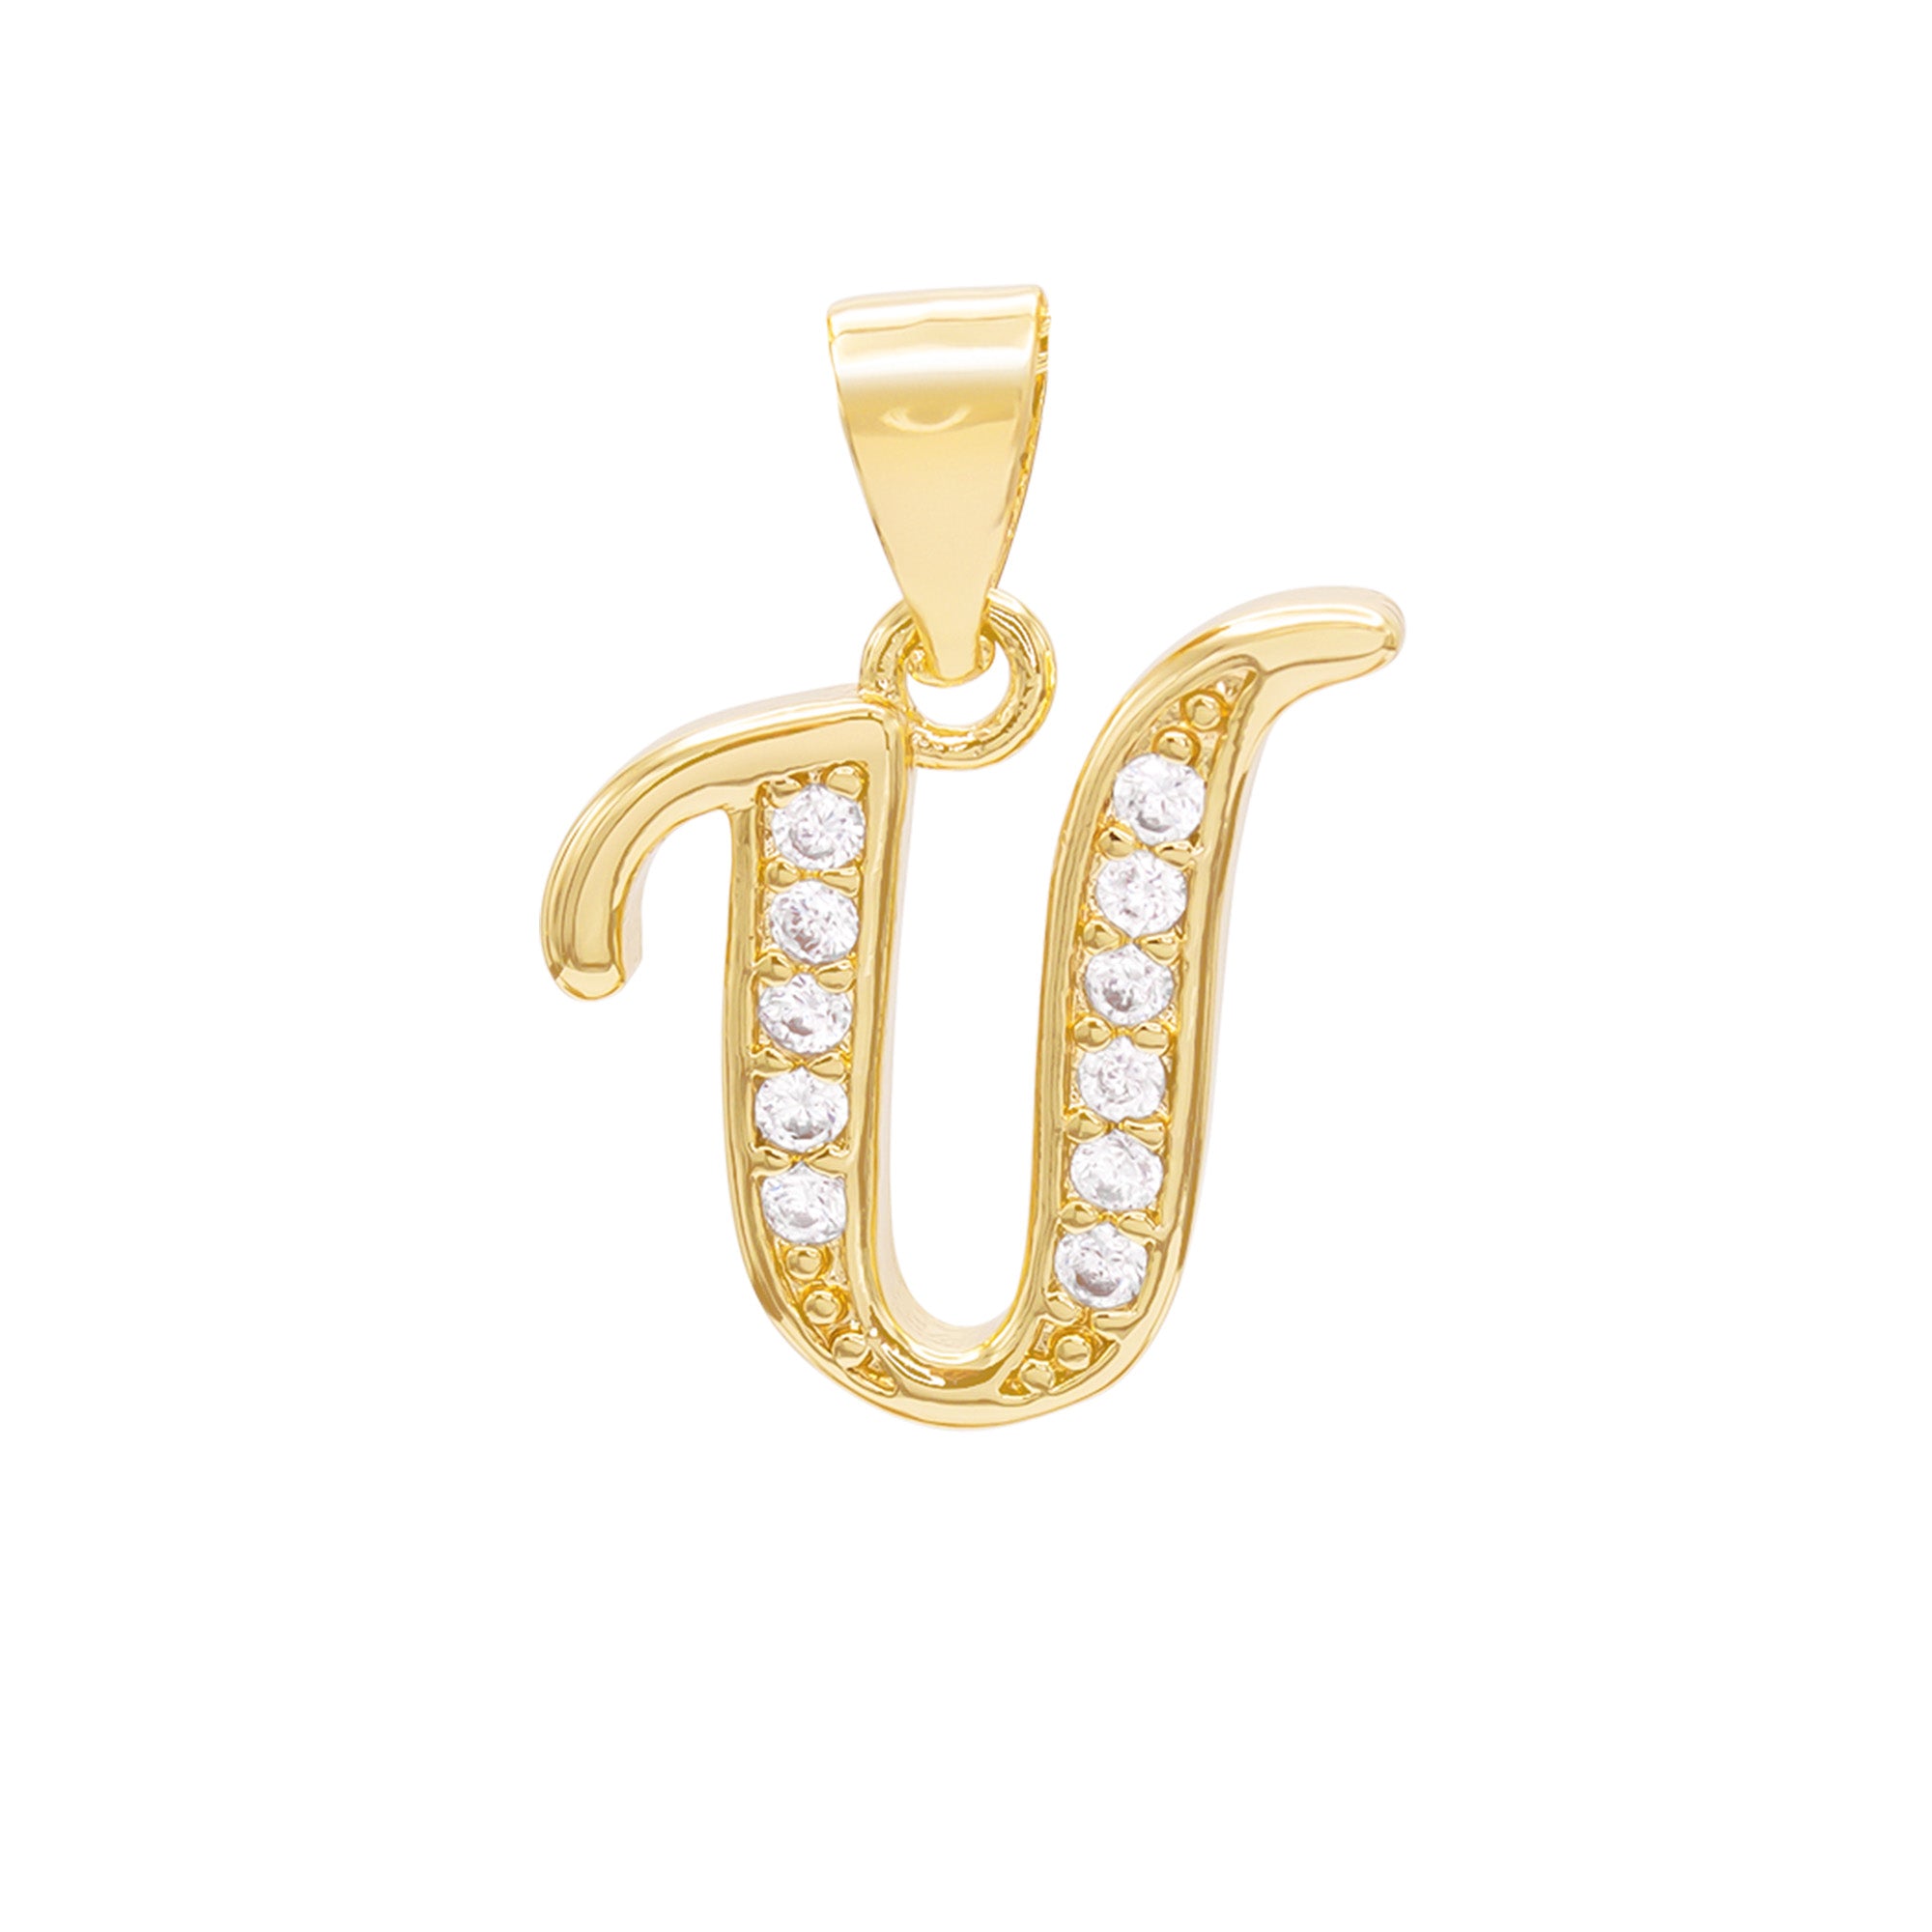 14K Gold Filled Charm Curb Foot Jewelry